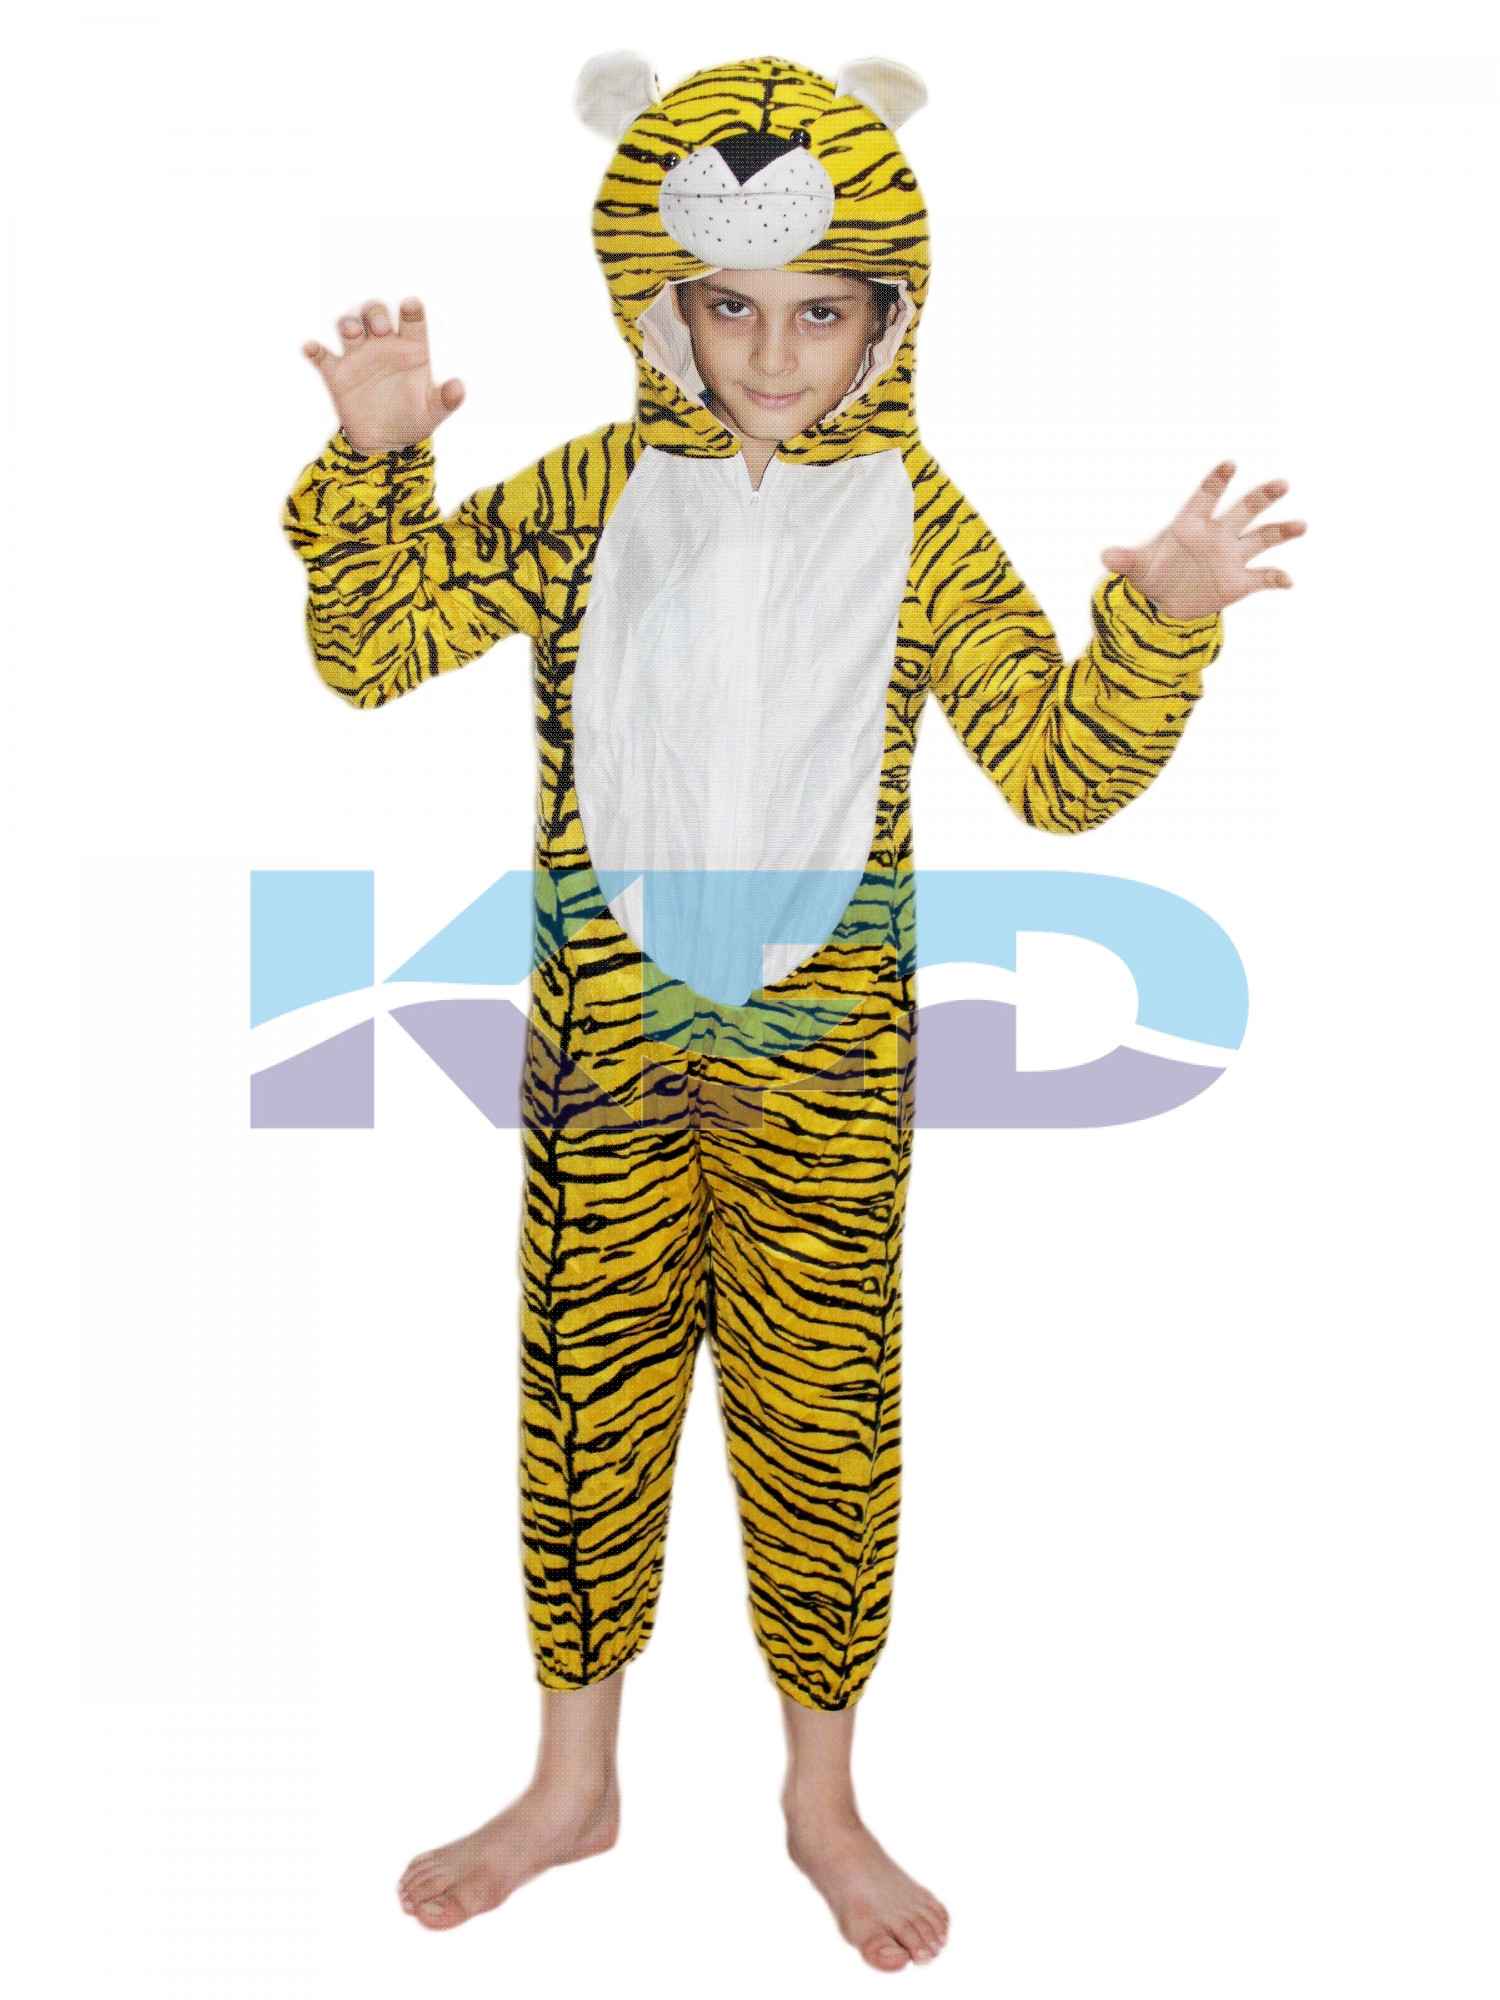 Tiger fancy dress for kids,Wild Animal Costume for Annual function/Theme party/Competition/Stage Shows/Birthday Party Dress